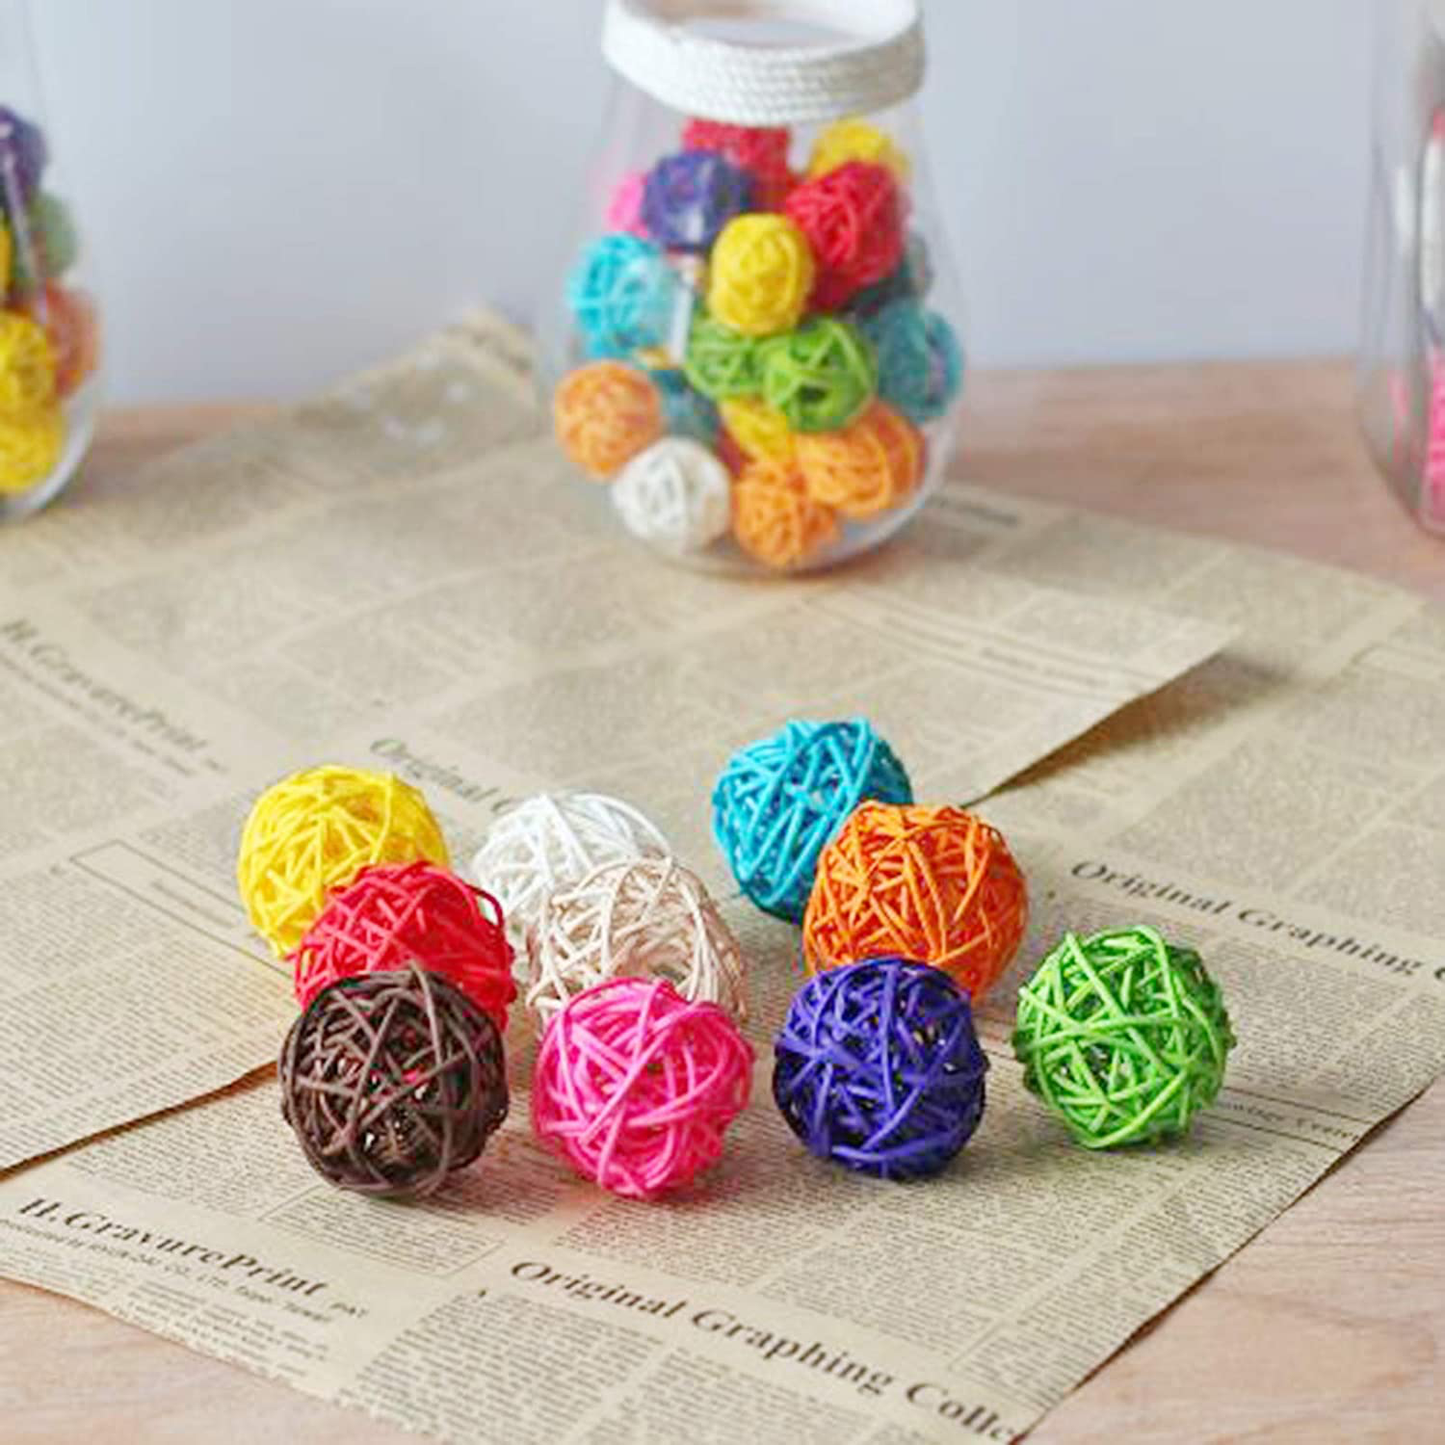 Benvo Rattan Balls 32 Pack 1.2 Inch Wicker Ball Birds Toy Quaker Parrot Parakeet Chewing Toys Pet Bite Toys for Budgies Conures Hamsters Ball Orbs Crafts DIY Accessories Vase Fillers (Multi-Colored)